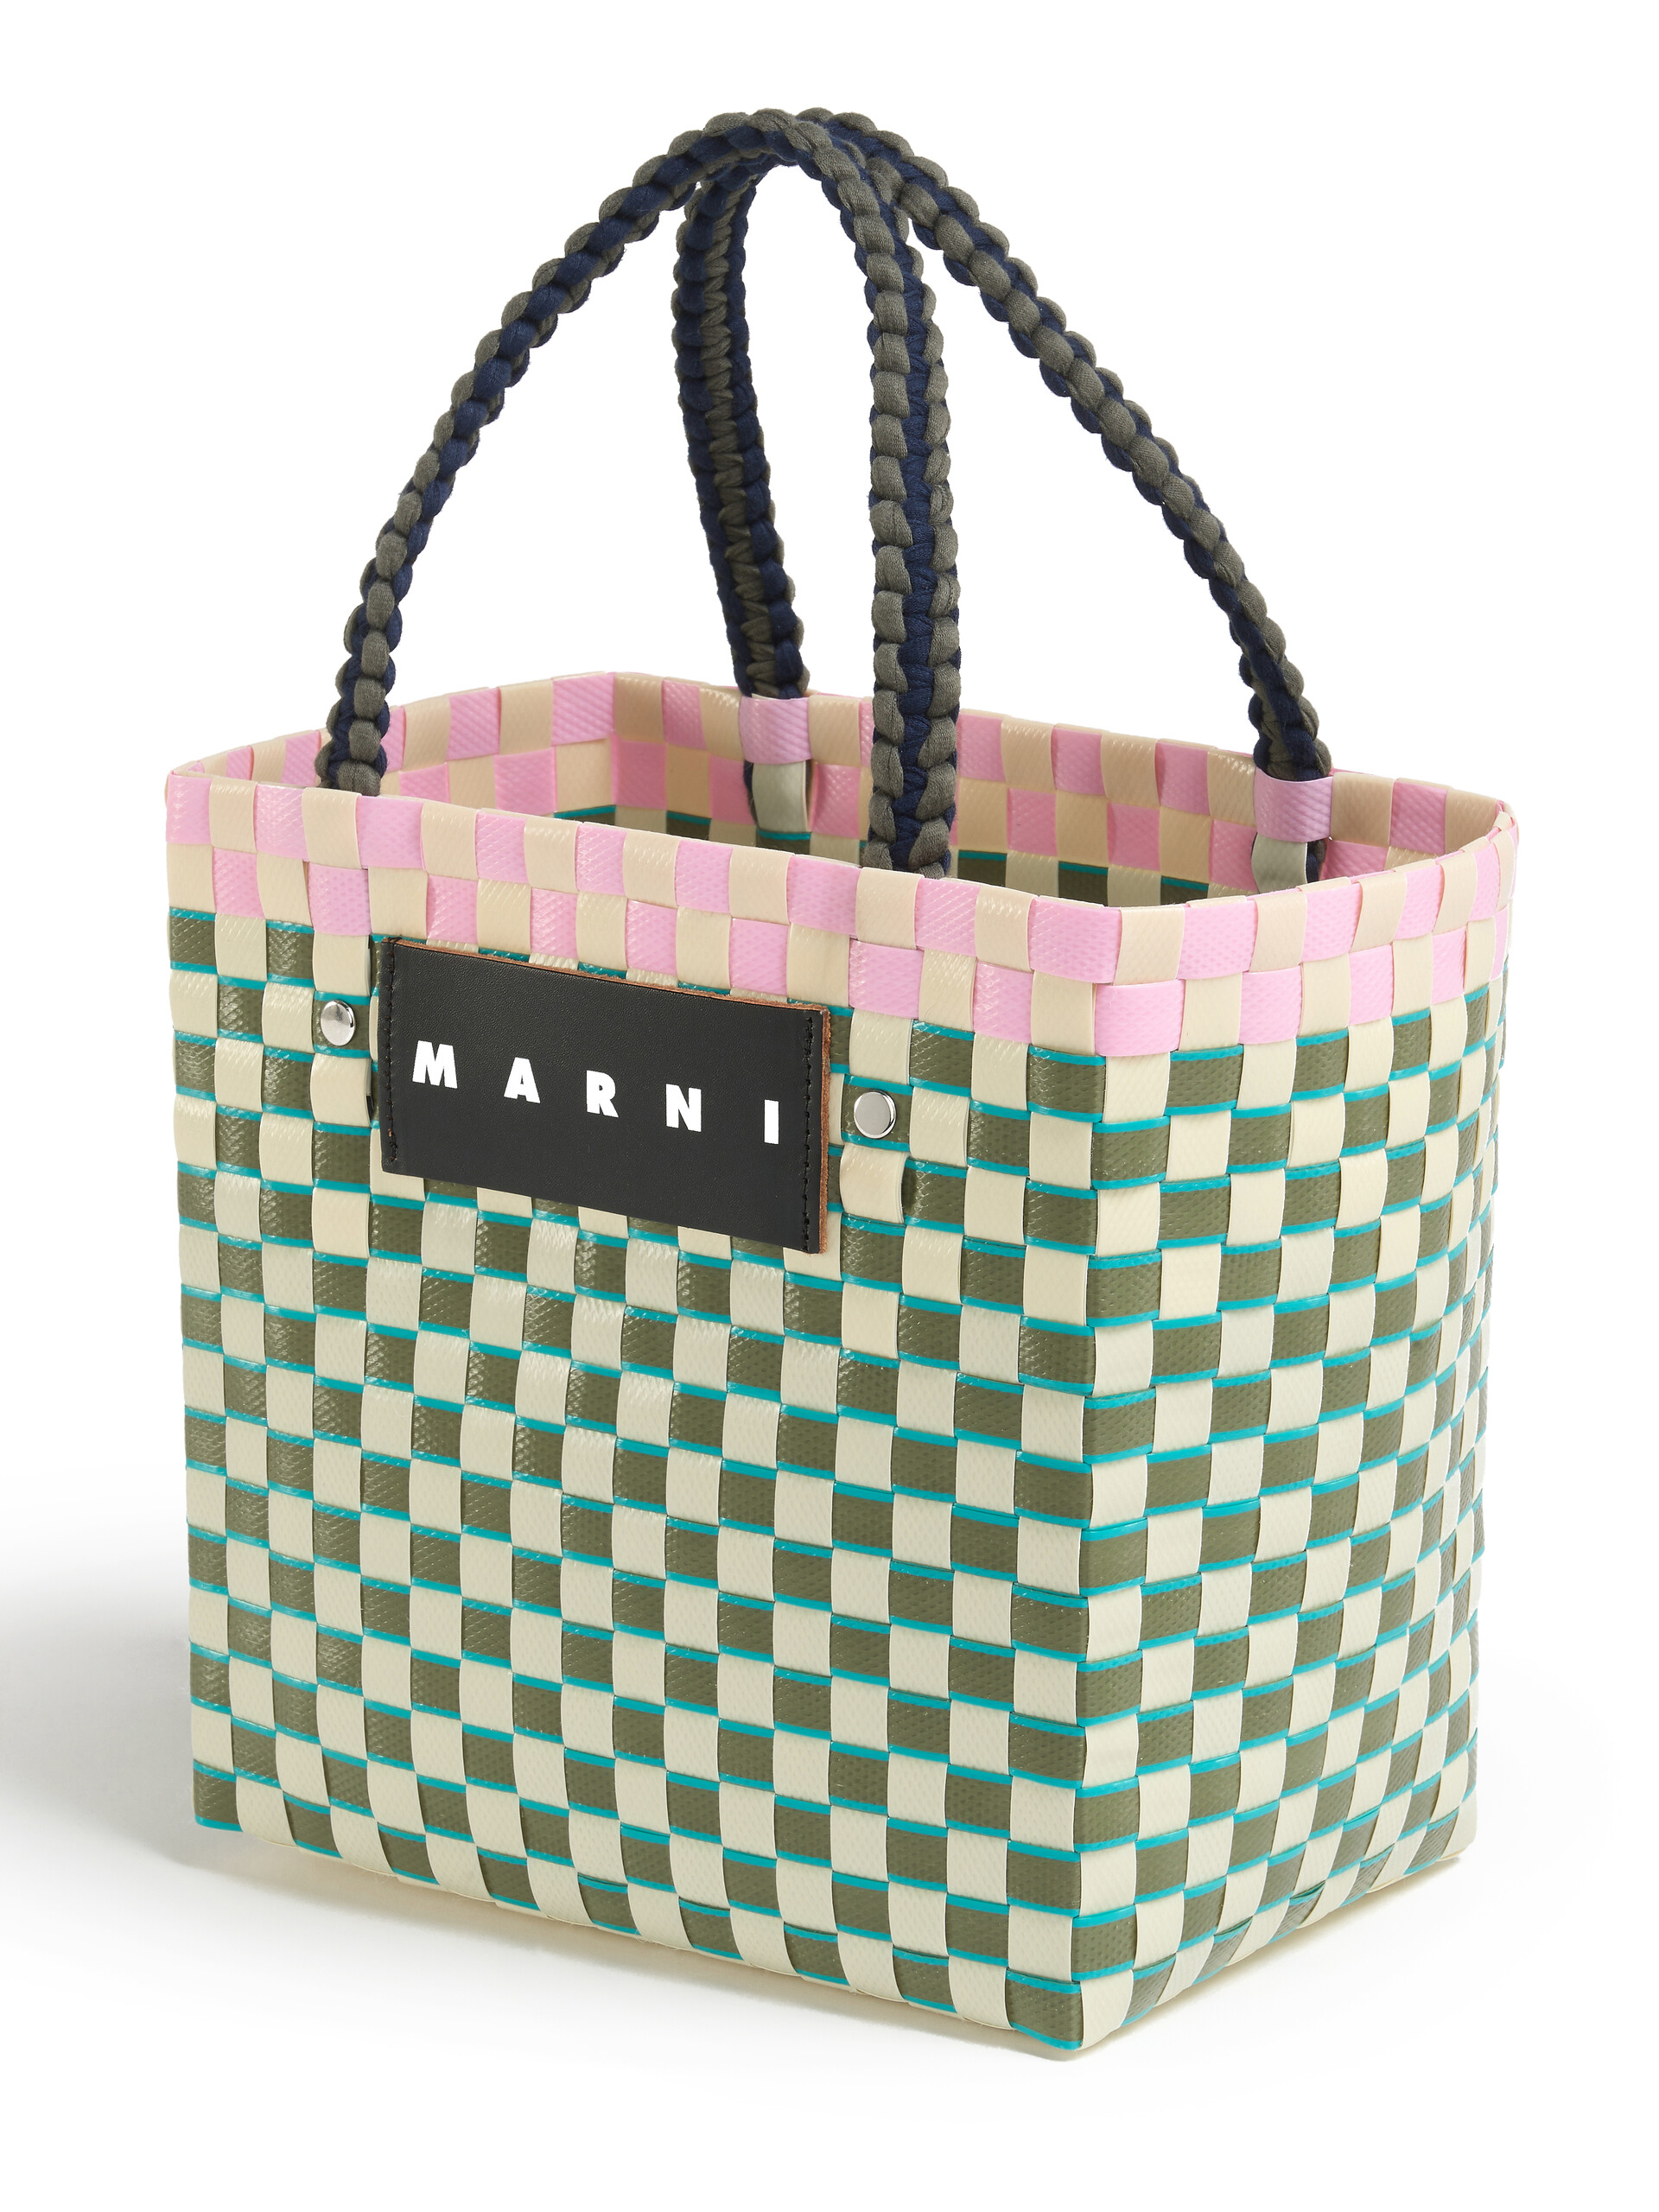 MARNI MARKET BASKET bag in light blue square woven material - Bags - Image 4